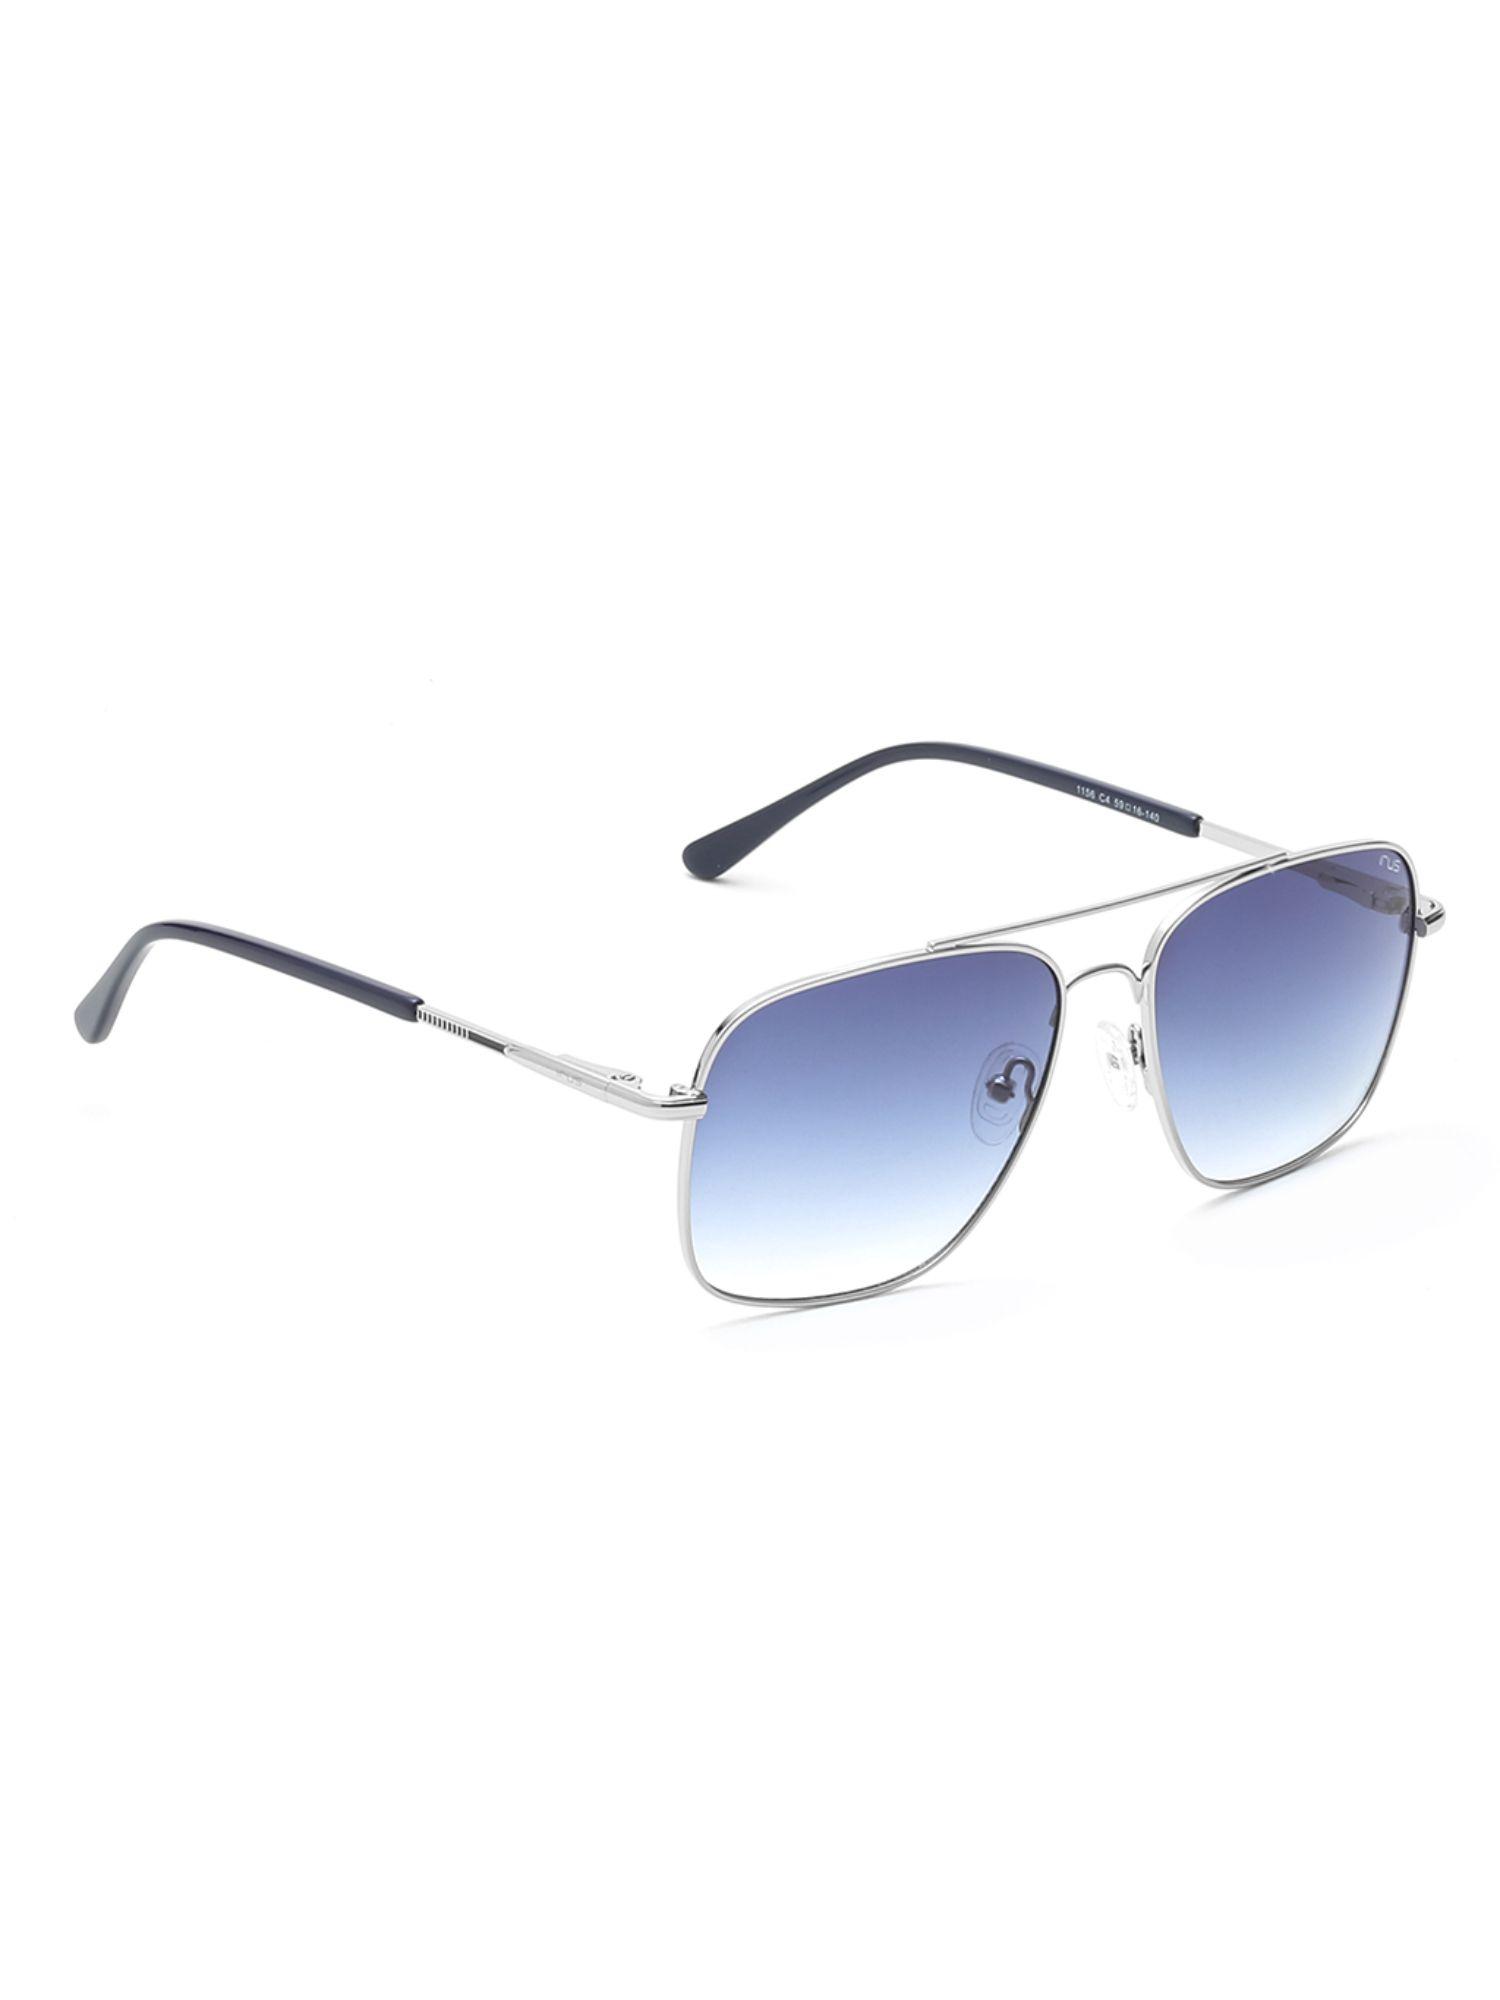 uv protected sunglasses for men with blue coloured gradient polycarbonate lens (59)